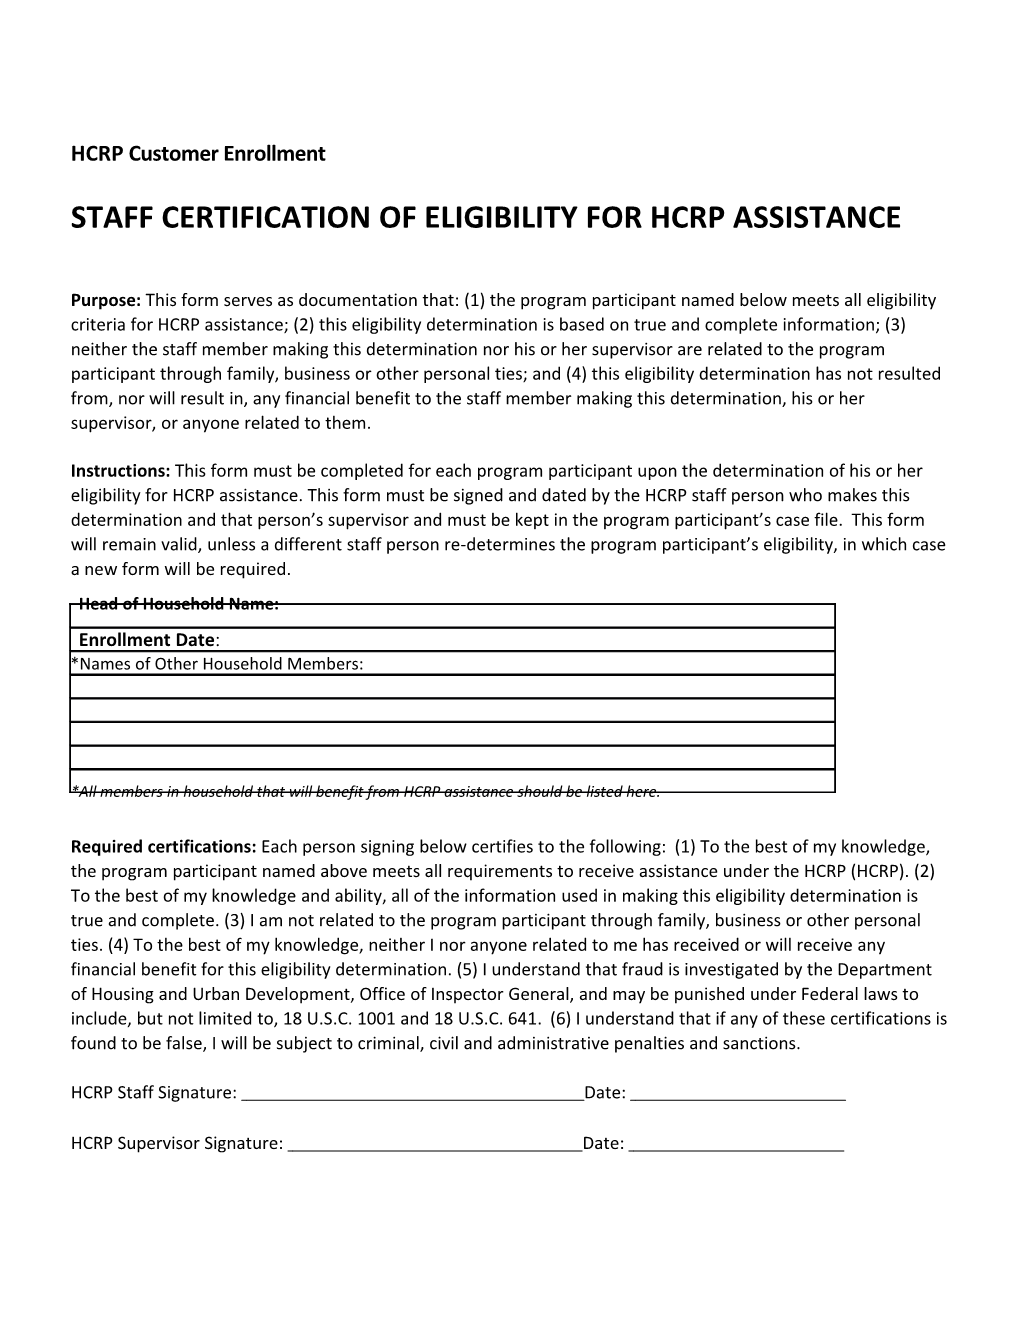 Staffcertificationof Eligibility Forhcrp Assistance